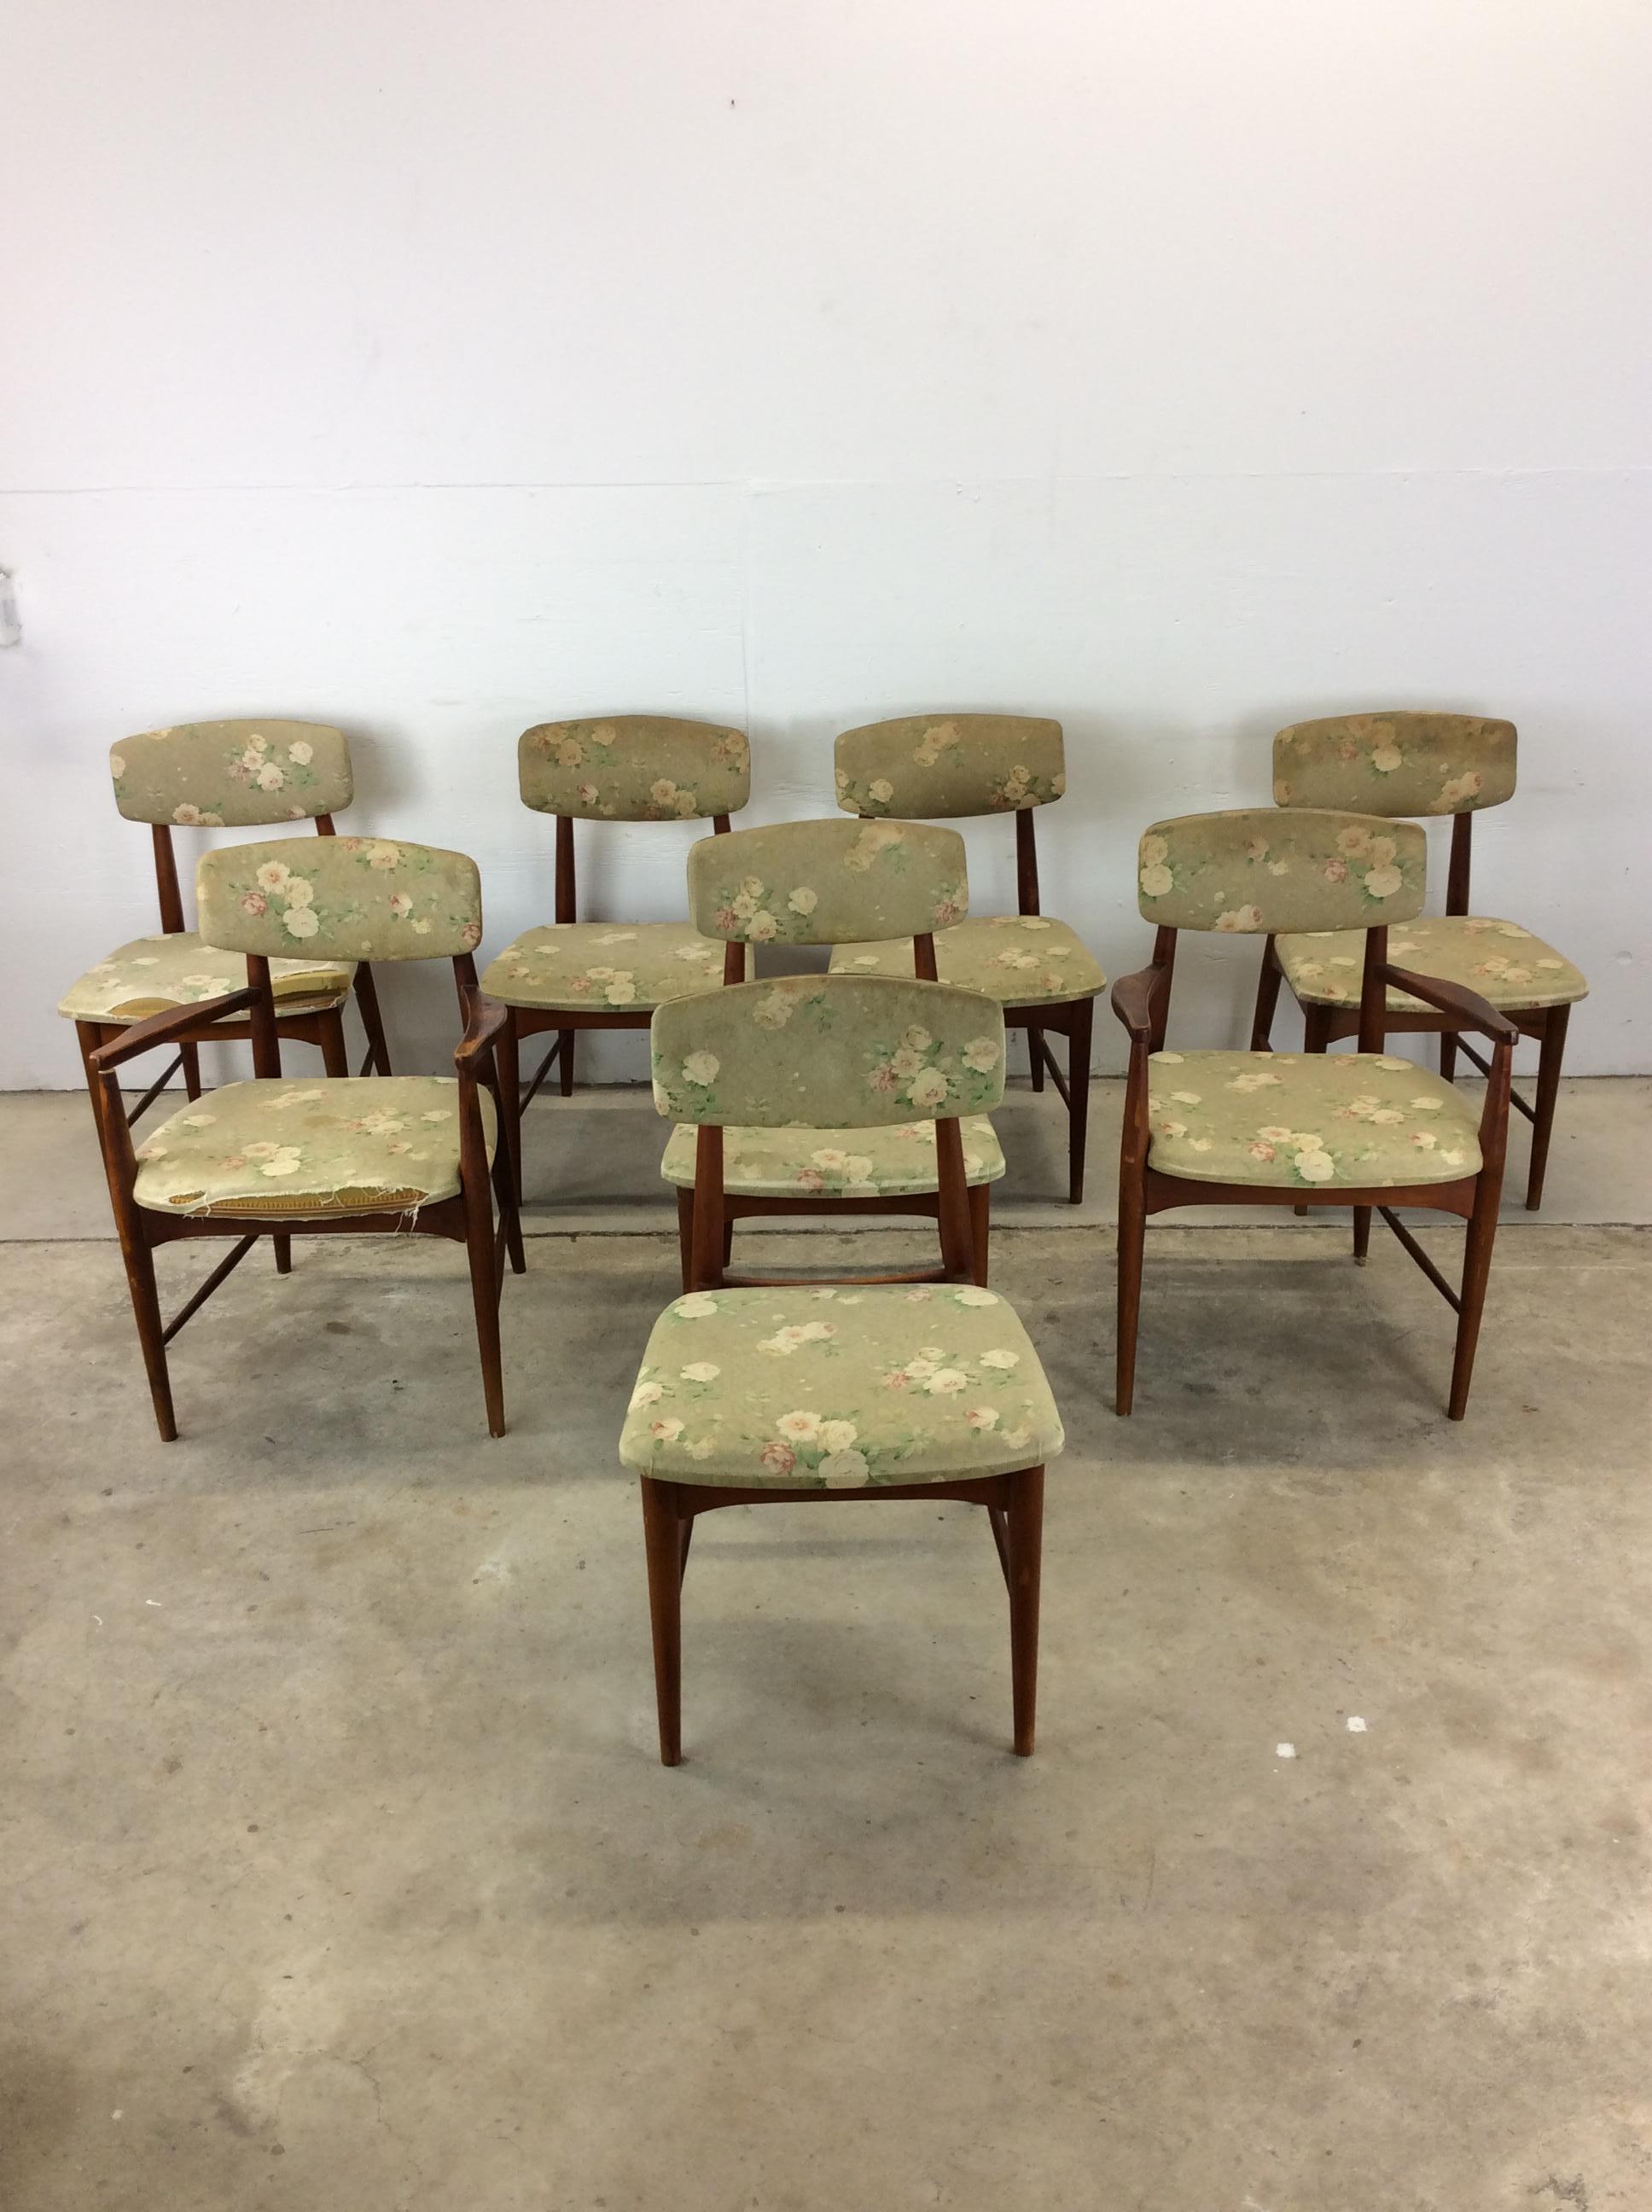 American Set of 8 Mid Century Modern Dining Room Chairs with Vintage Upholstery